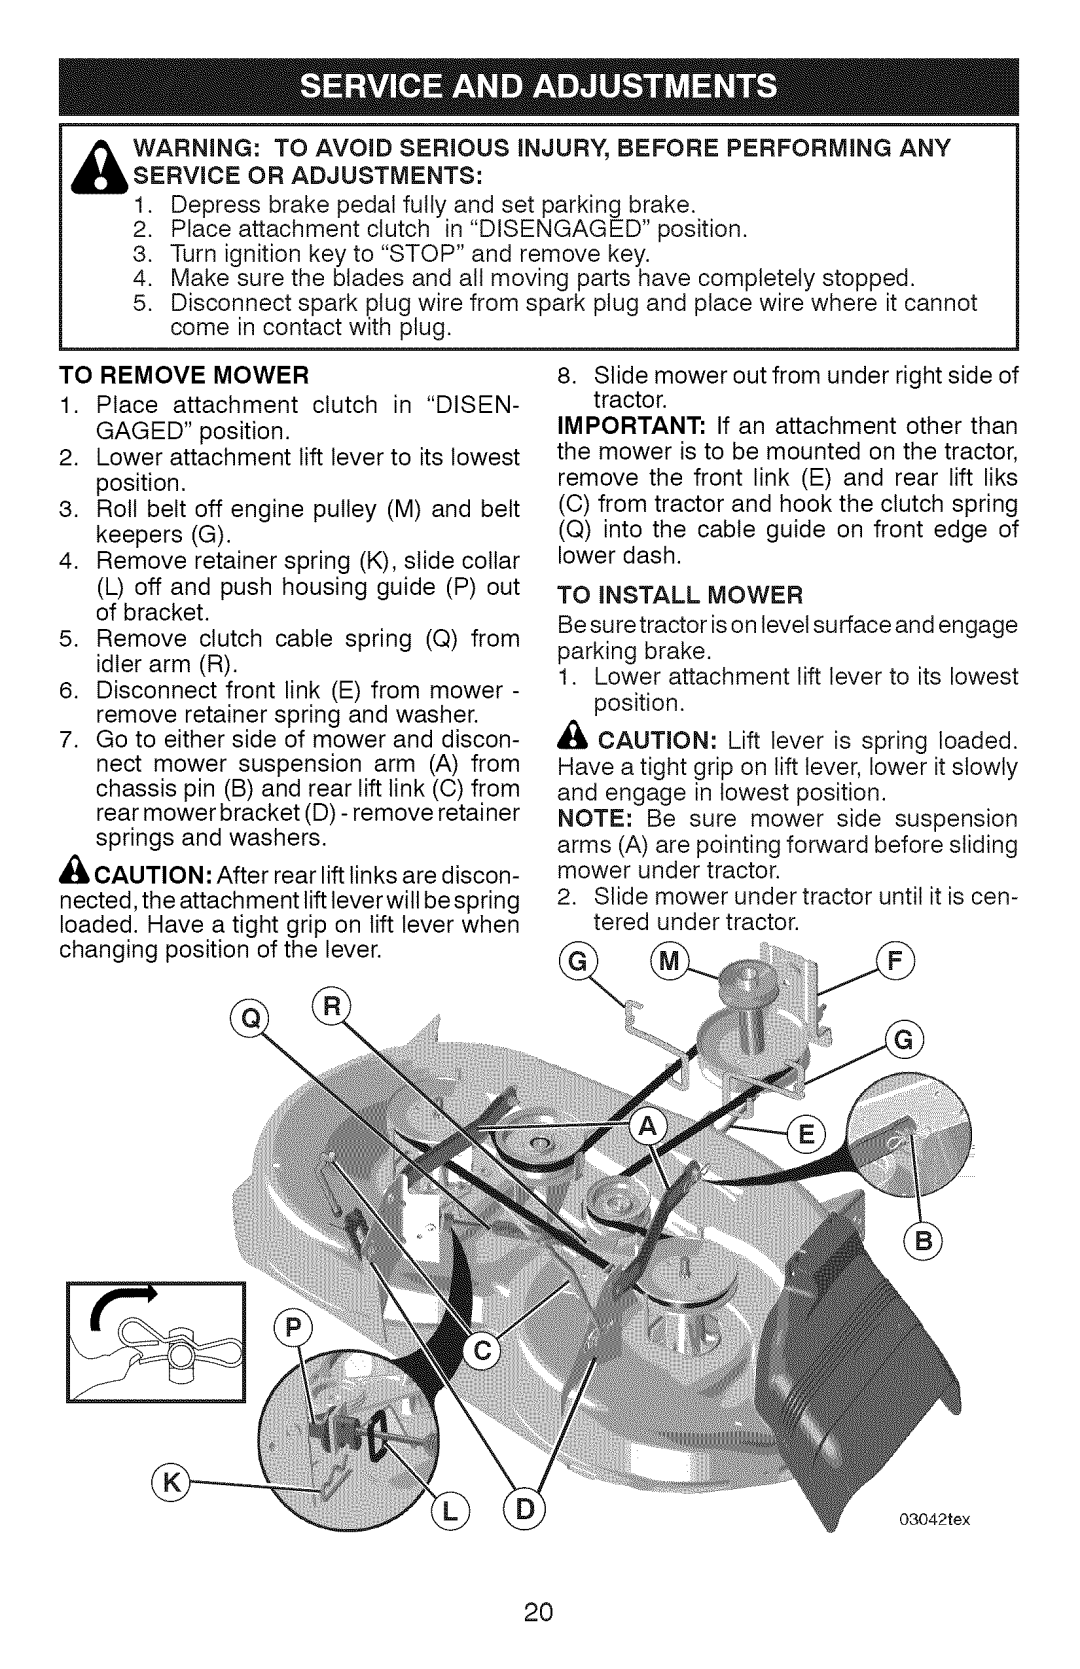 Craftsman 917.28934 owner manual Service Or Adjustments, To Remove Mower, TO iNSTALL MOWER 